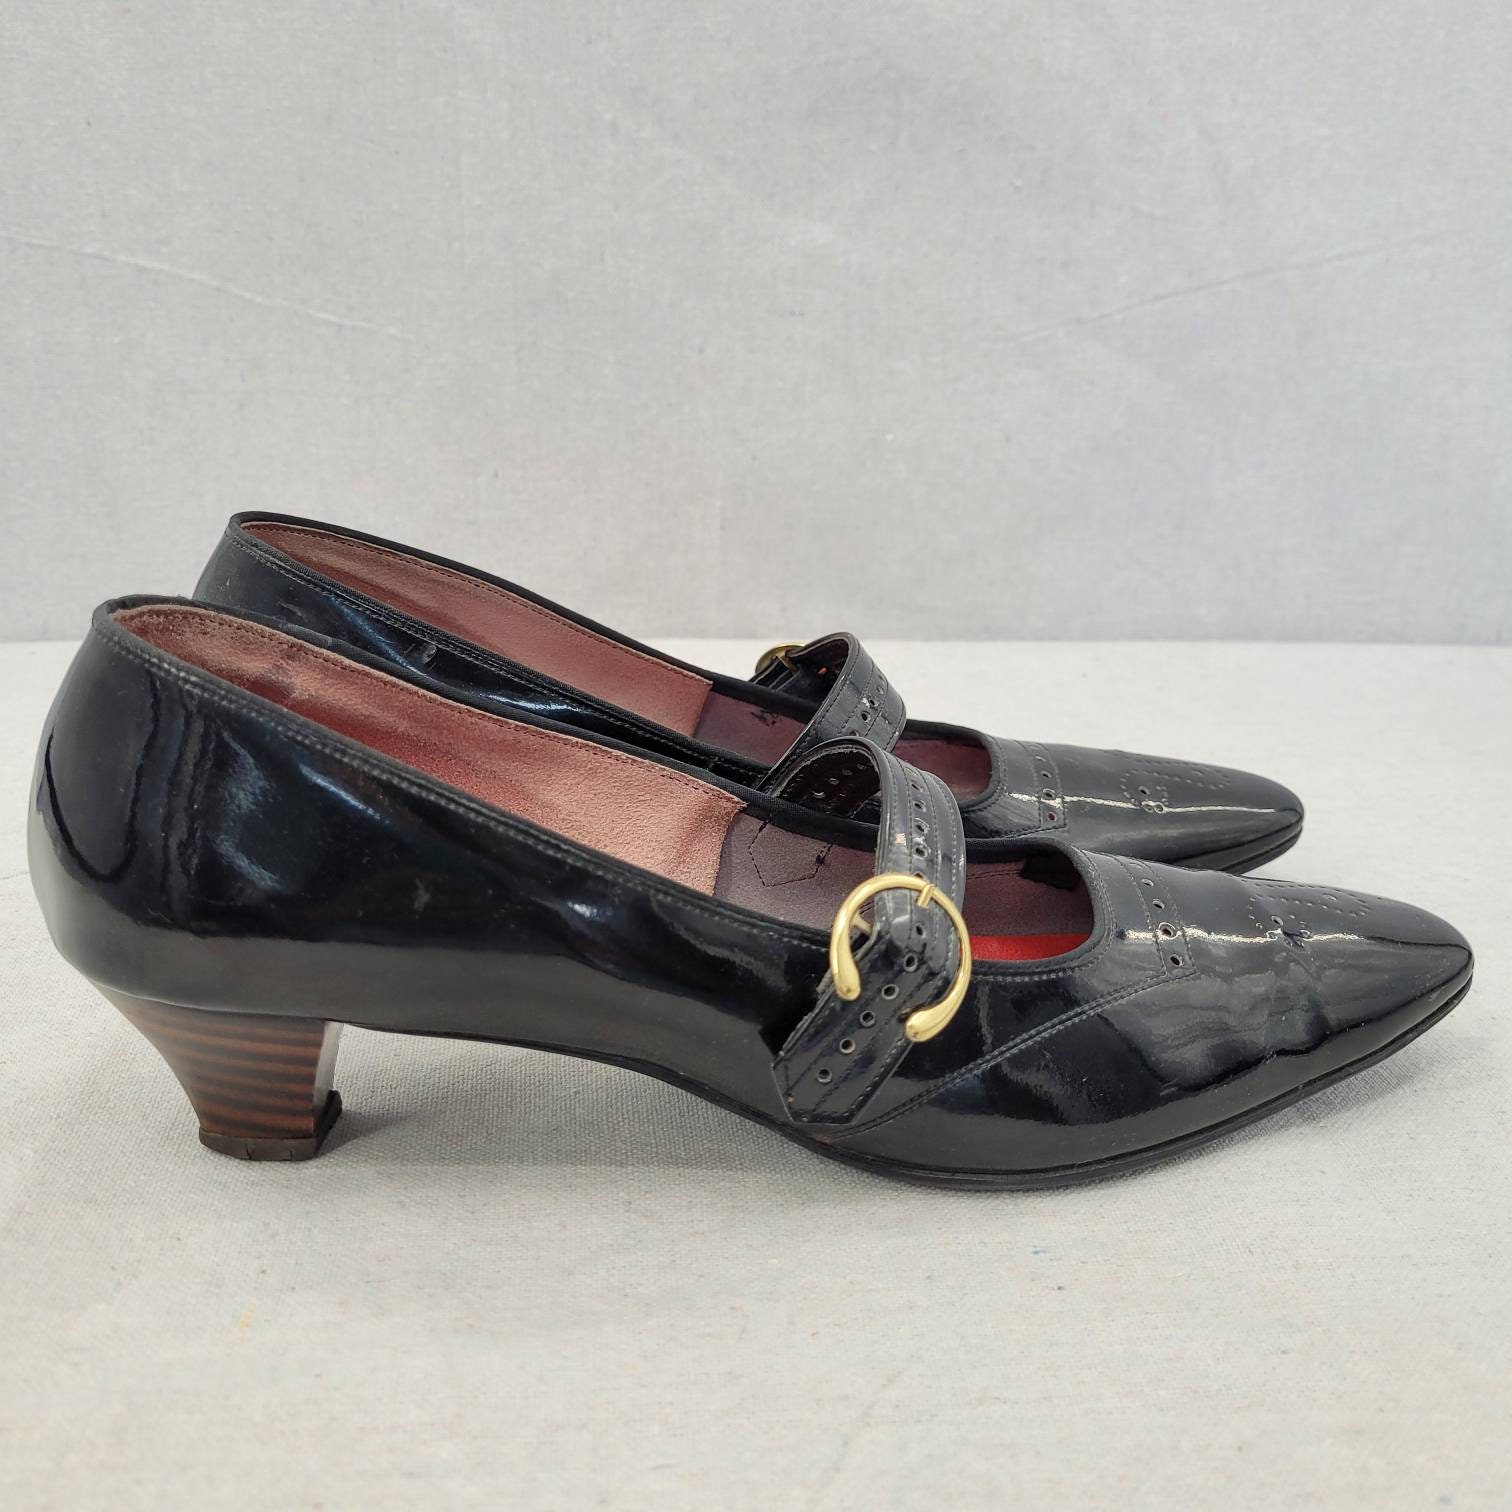 1970s Patent Leather Mary Jane Heels - Etsy